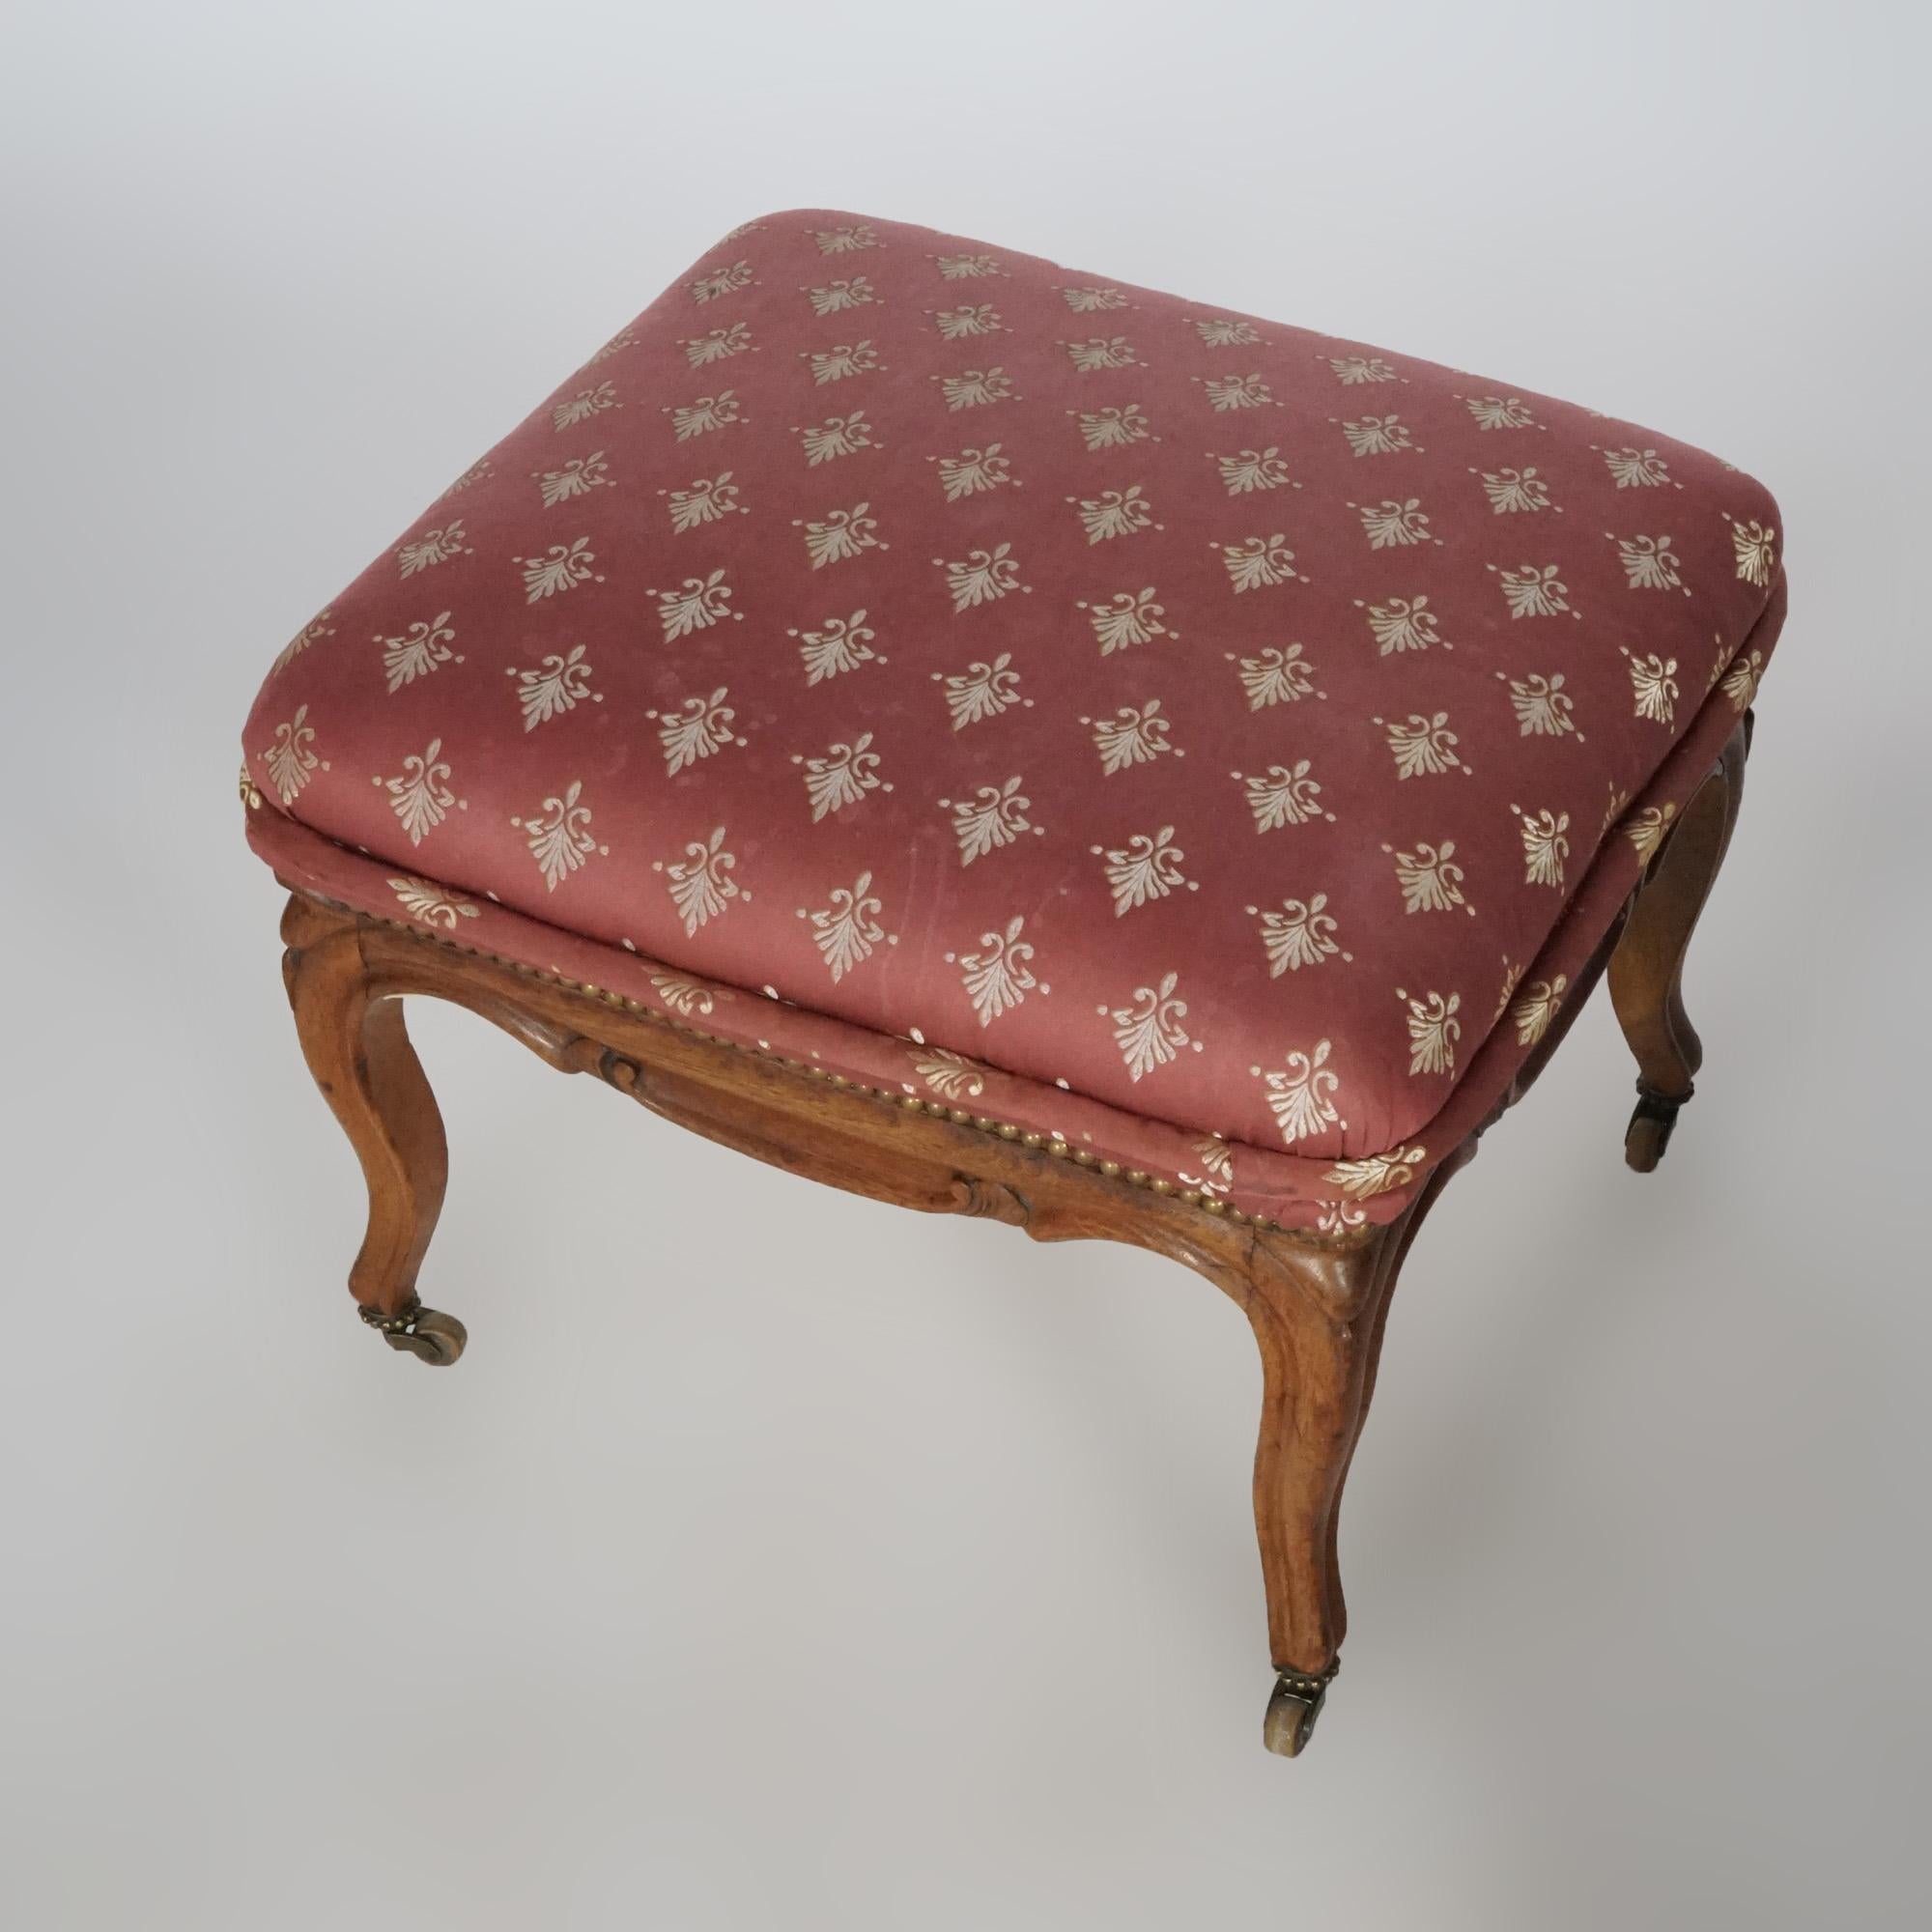 An antique French style footstool offers upholstered seat over walnut base having carved skirt and cabriole legs, circa 1920.

Measures- 18'' H x 23'' W x 21.5'' D.